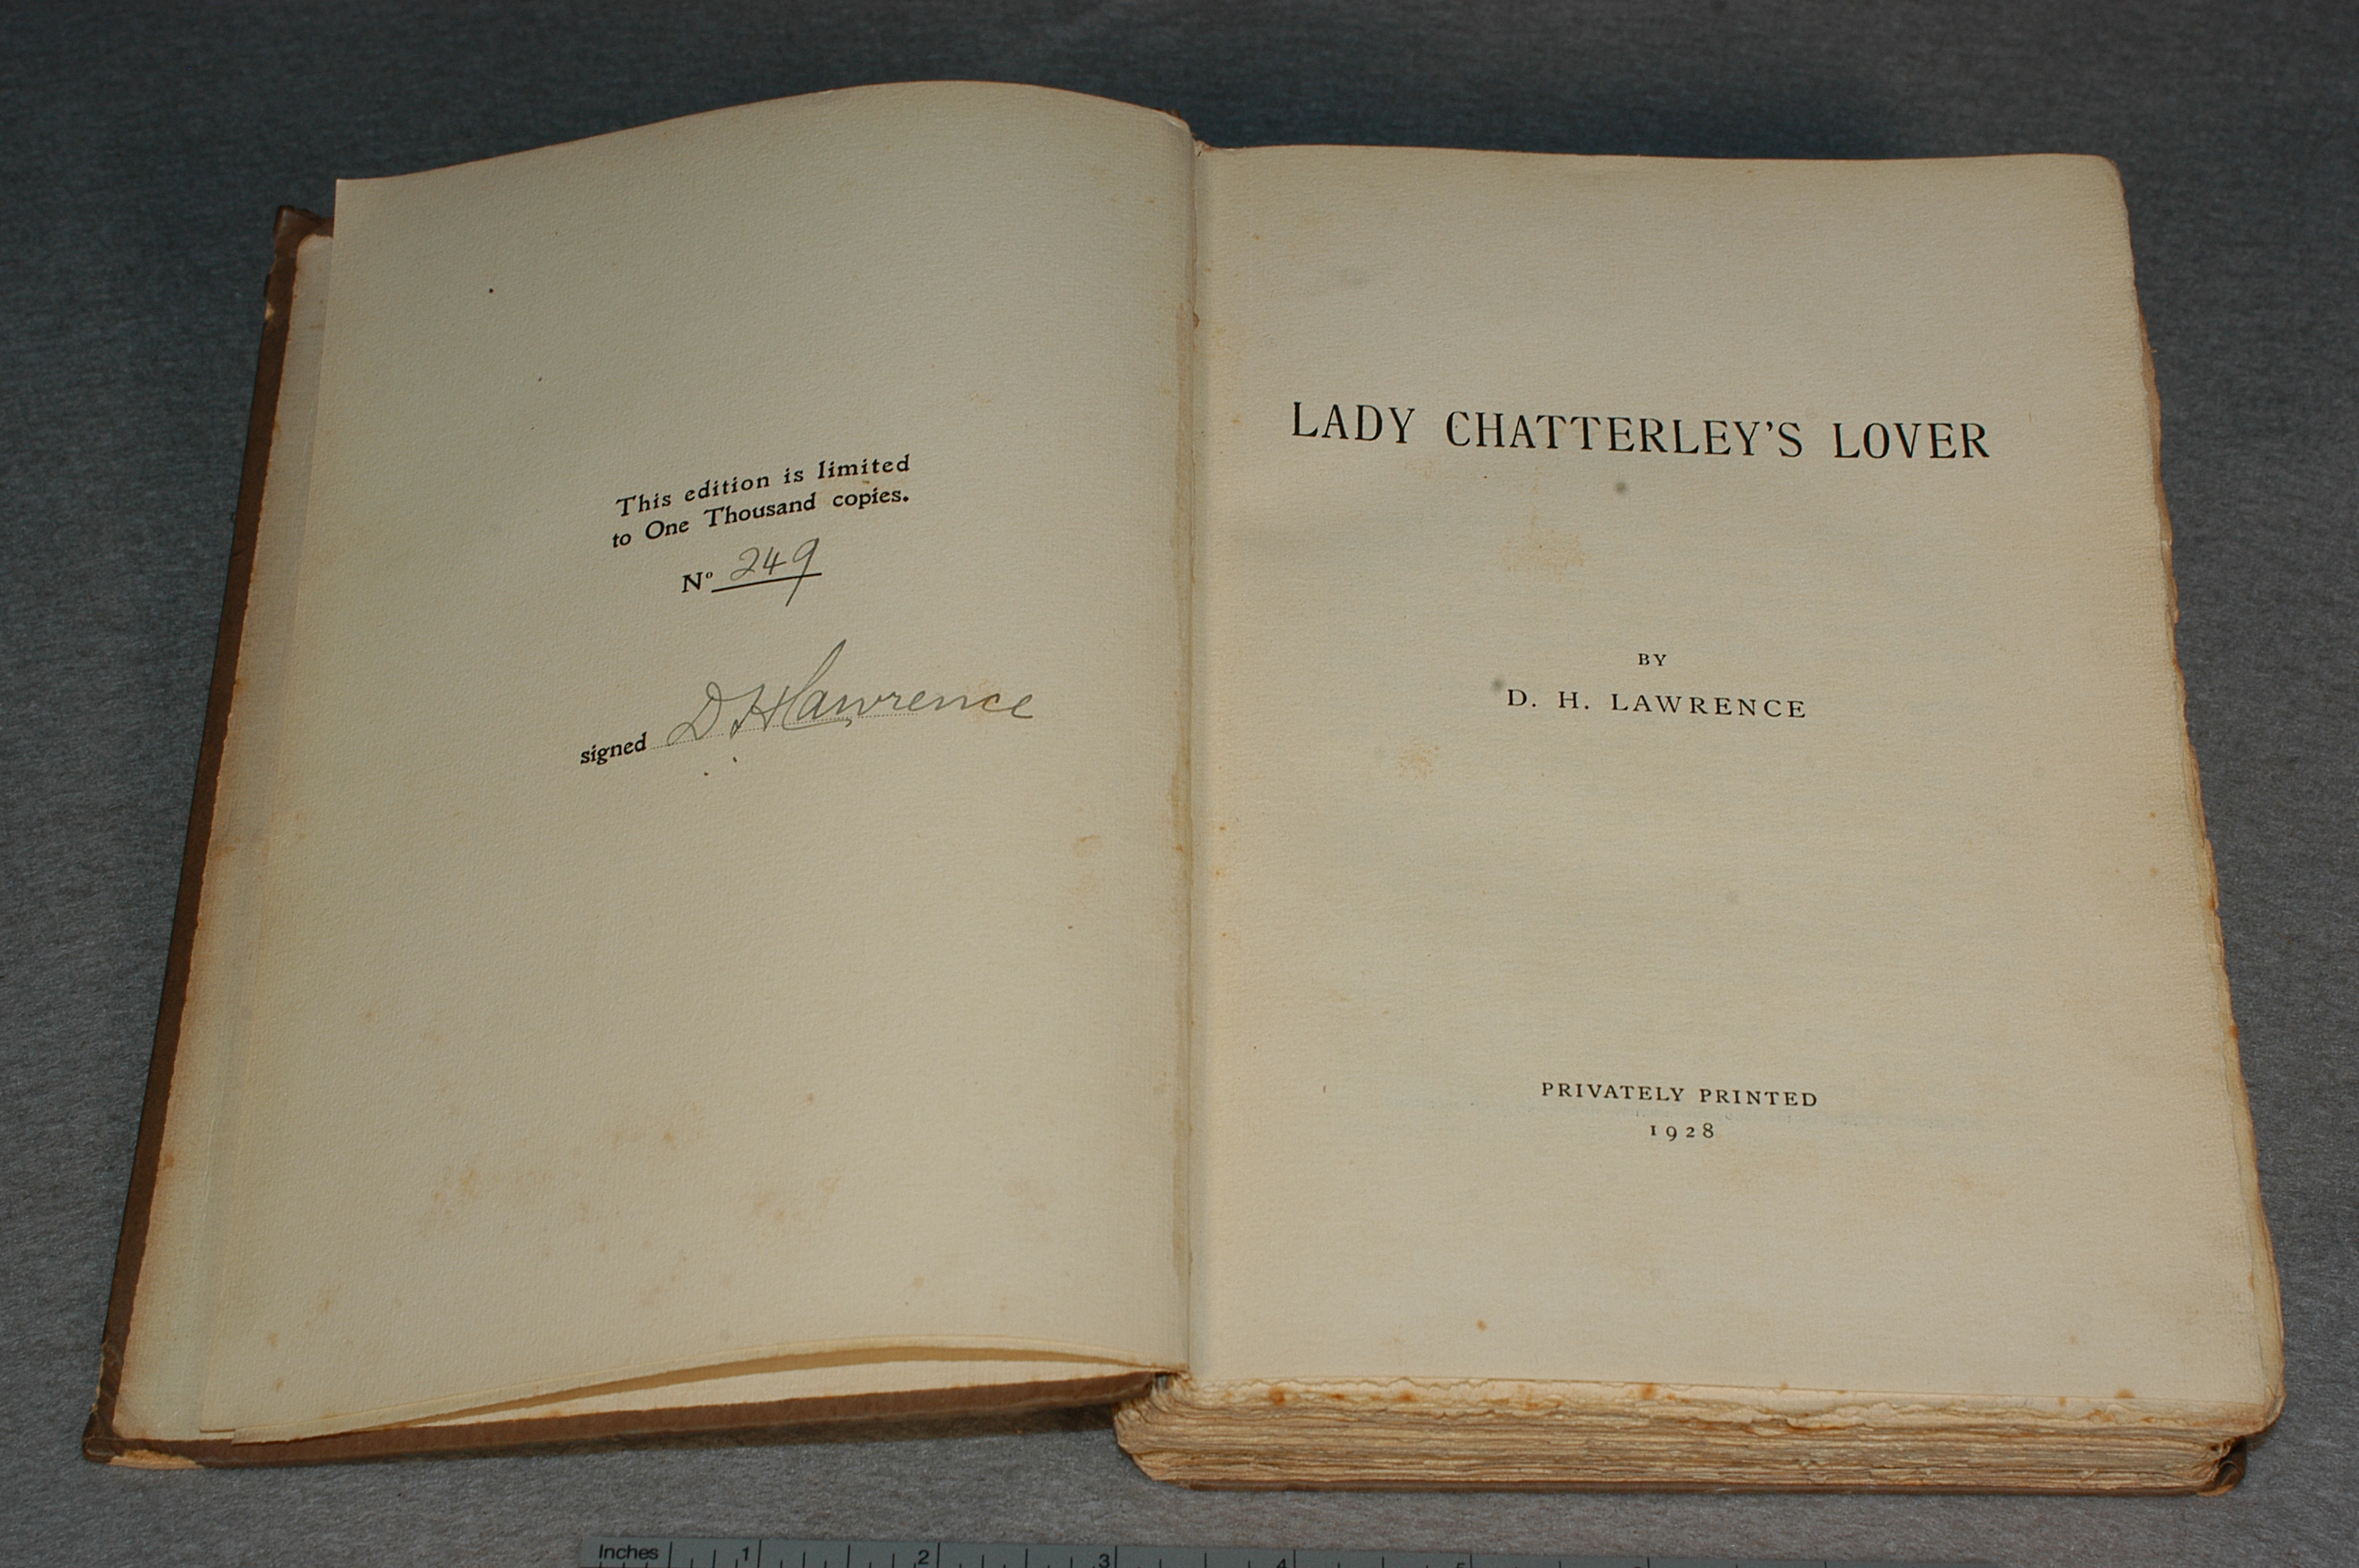 Image result for lady chatterley's lover first edition